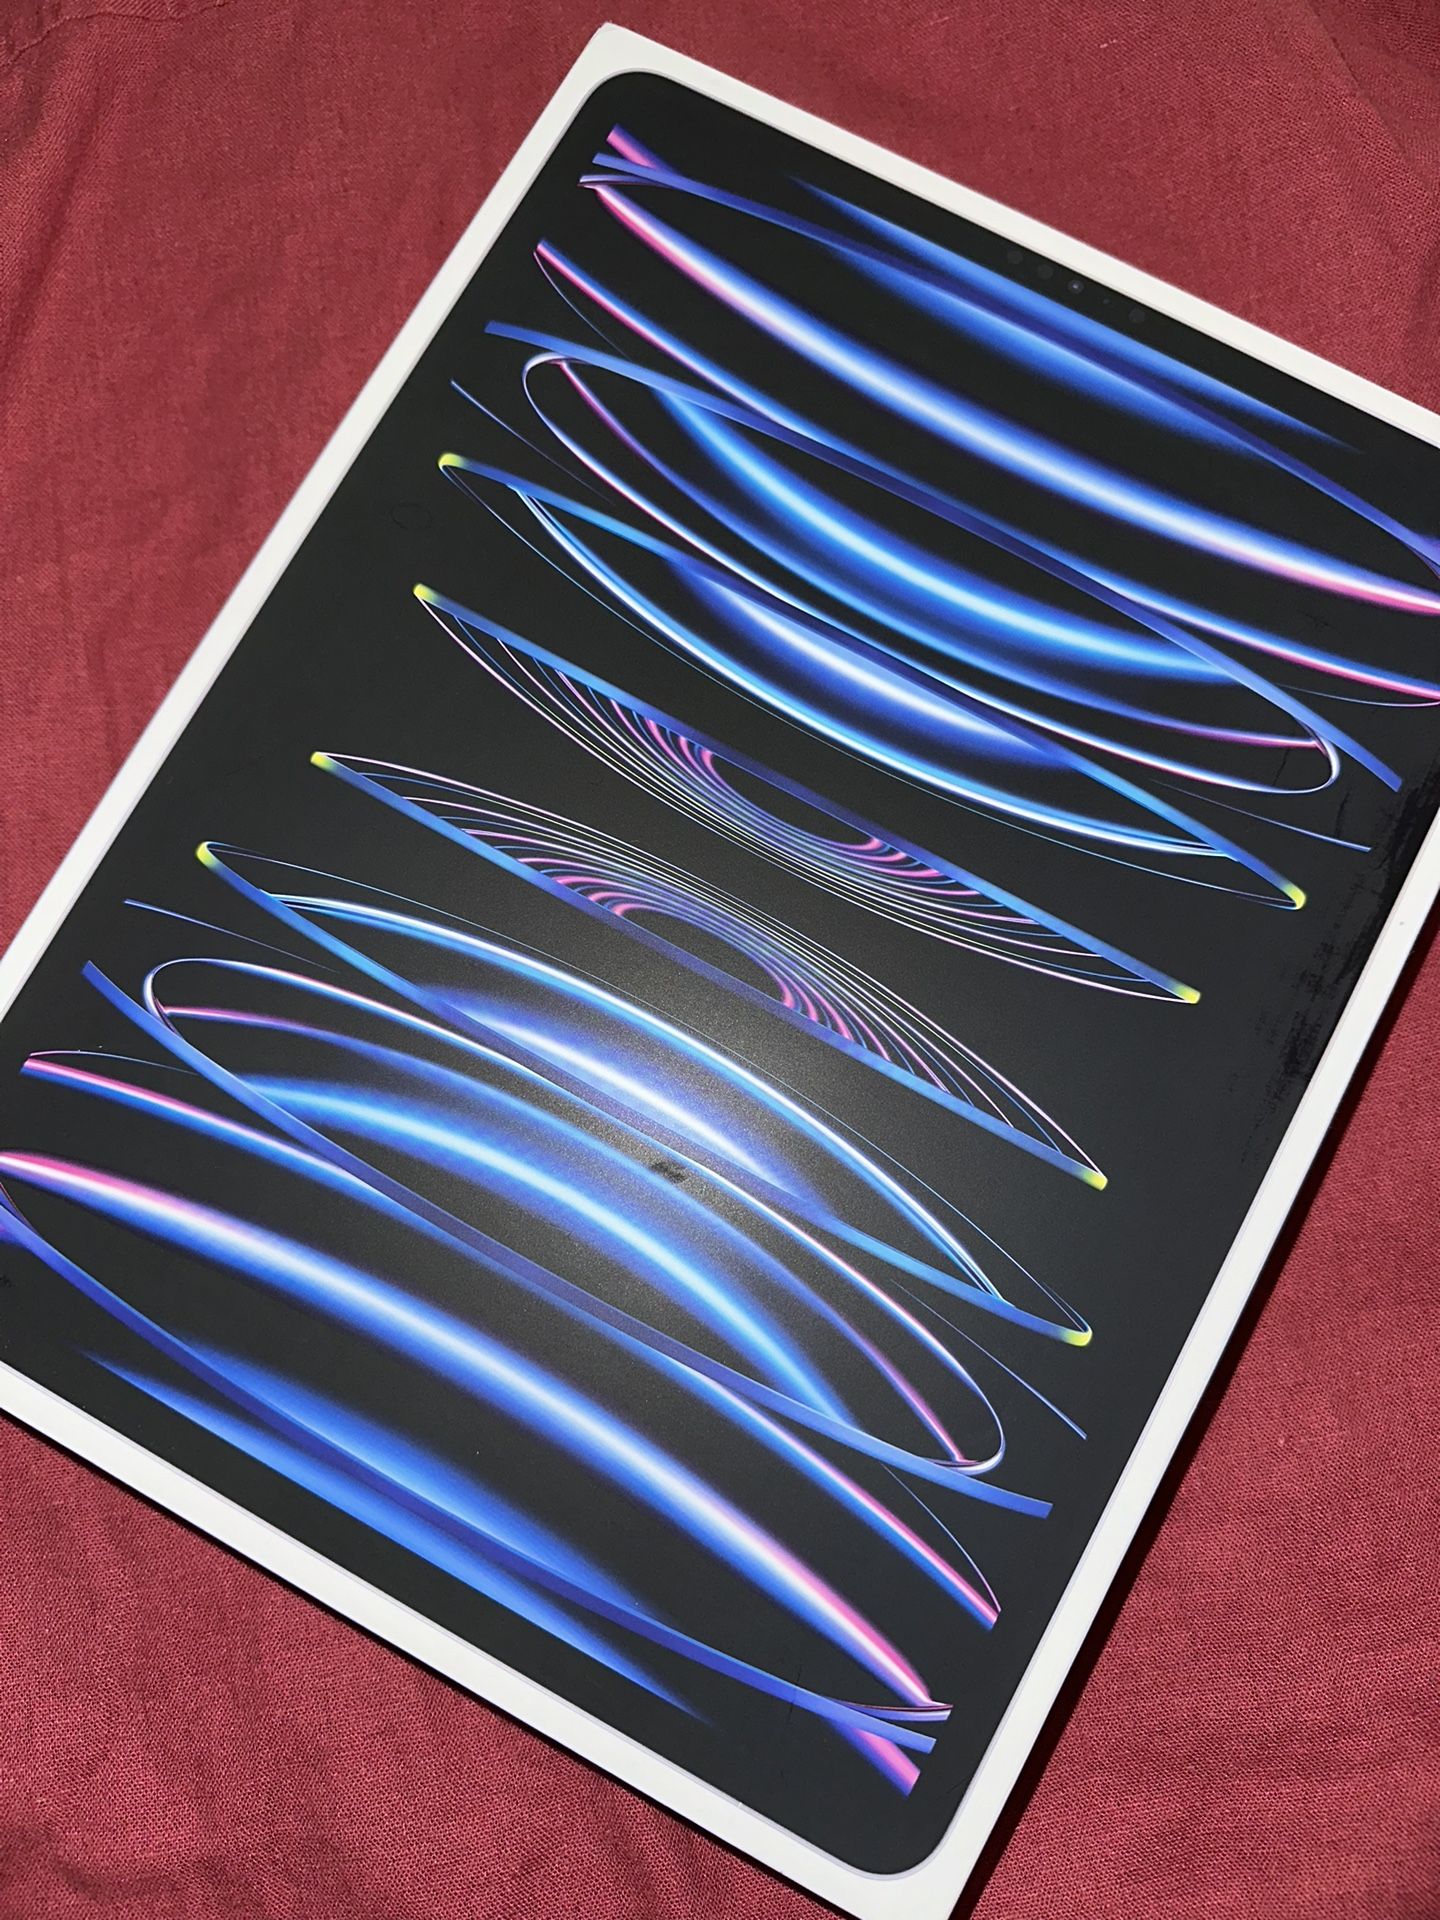 Apple iPad Pro 12.9 128gb 6th Gen Silver Wifi New Sealed M2 Chip Comes With Receipt 